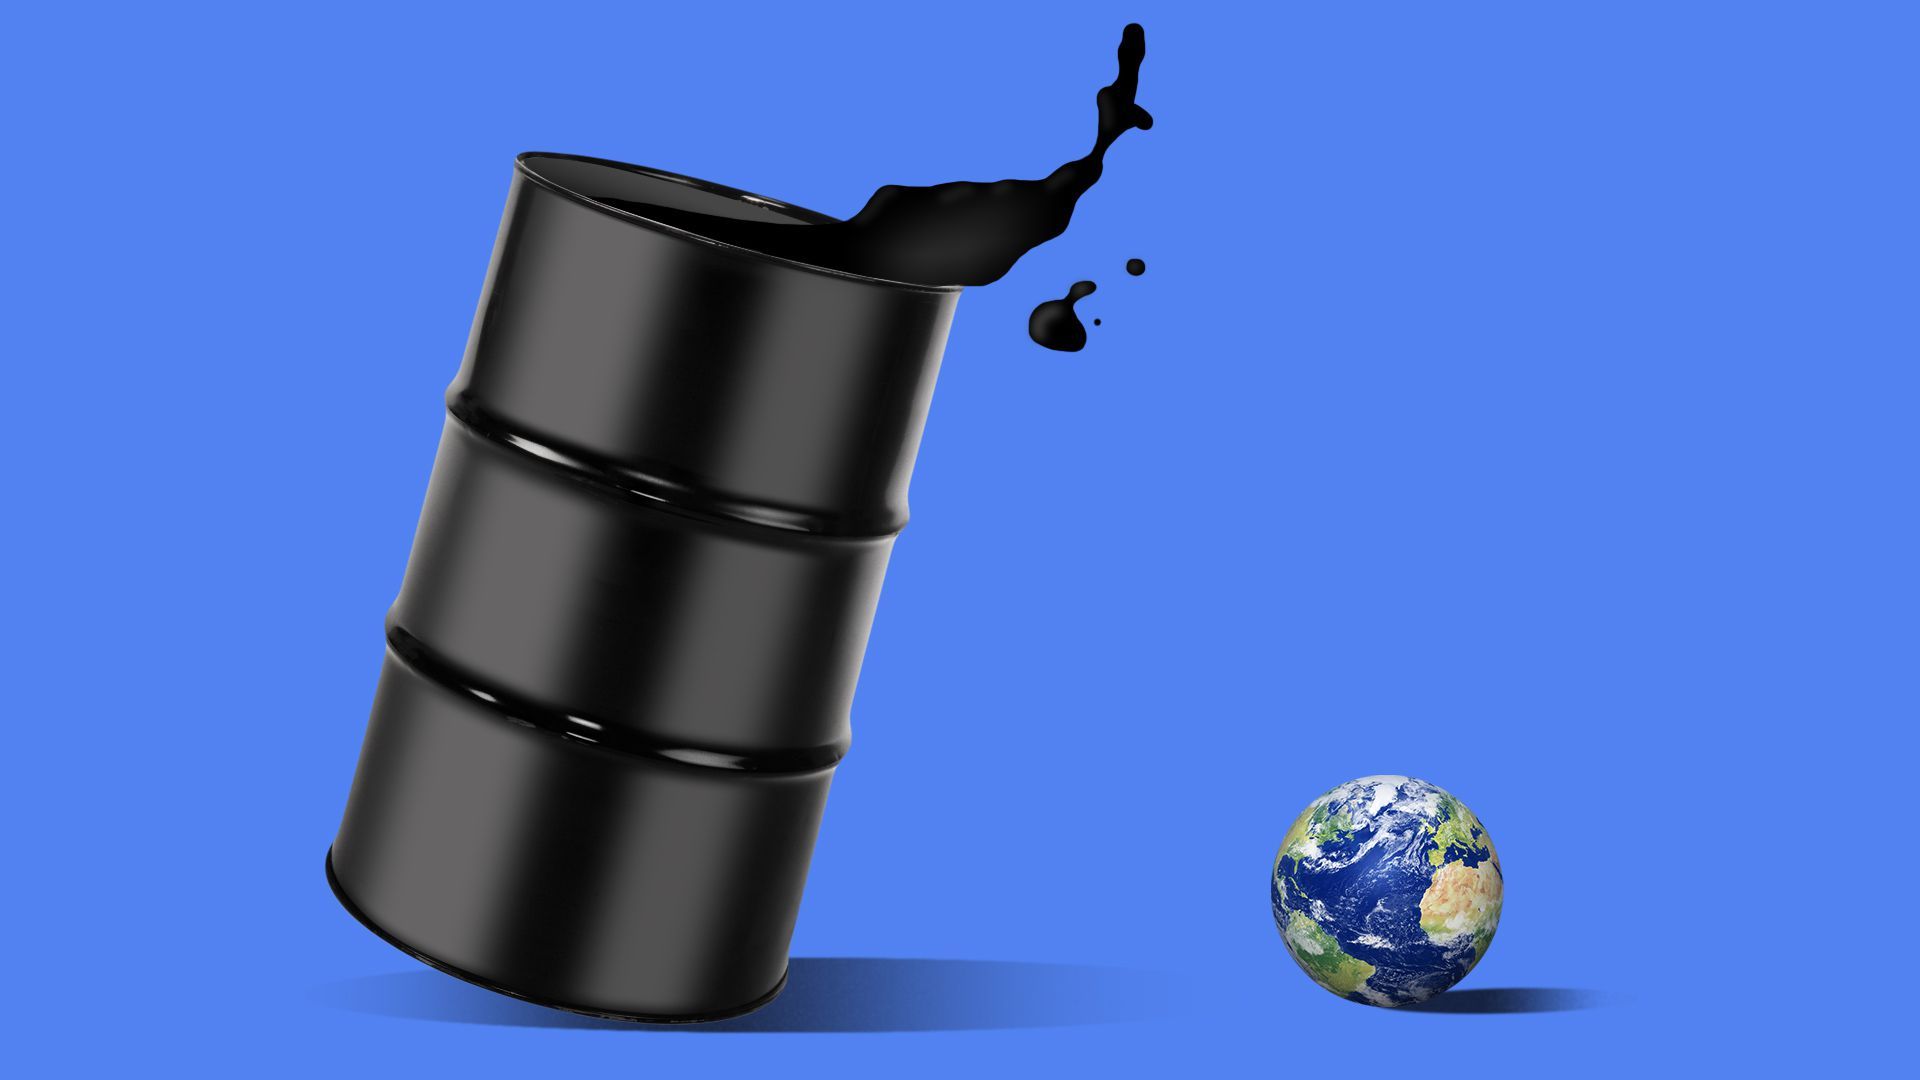 Illustration of a giant oil barrel about to tip over and spill oil over a small Earth